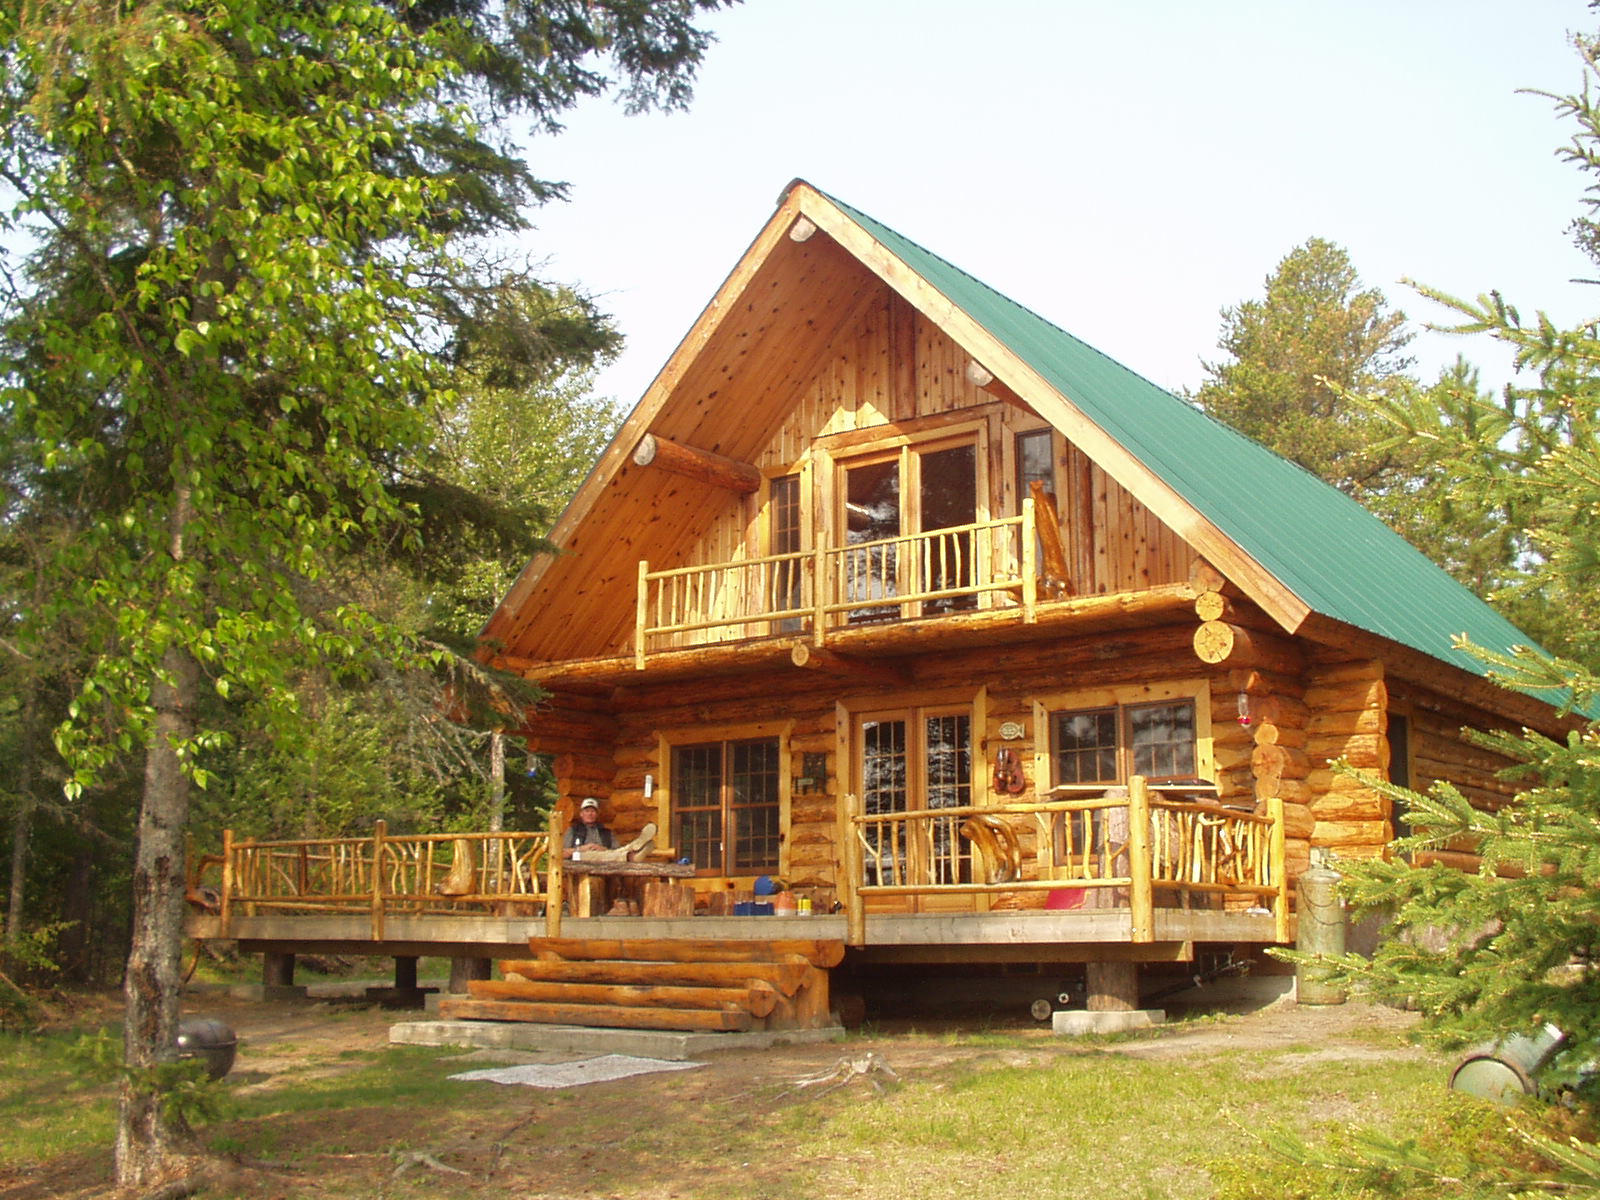 Top Quality Log Home Supplies For The Right Price